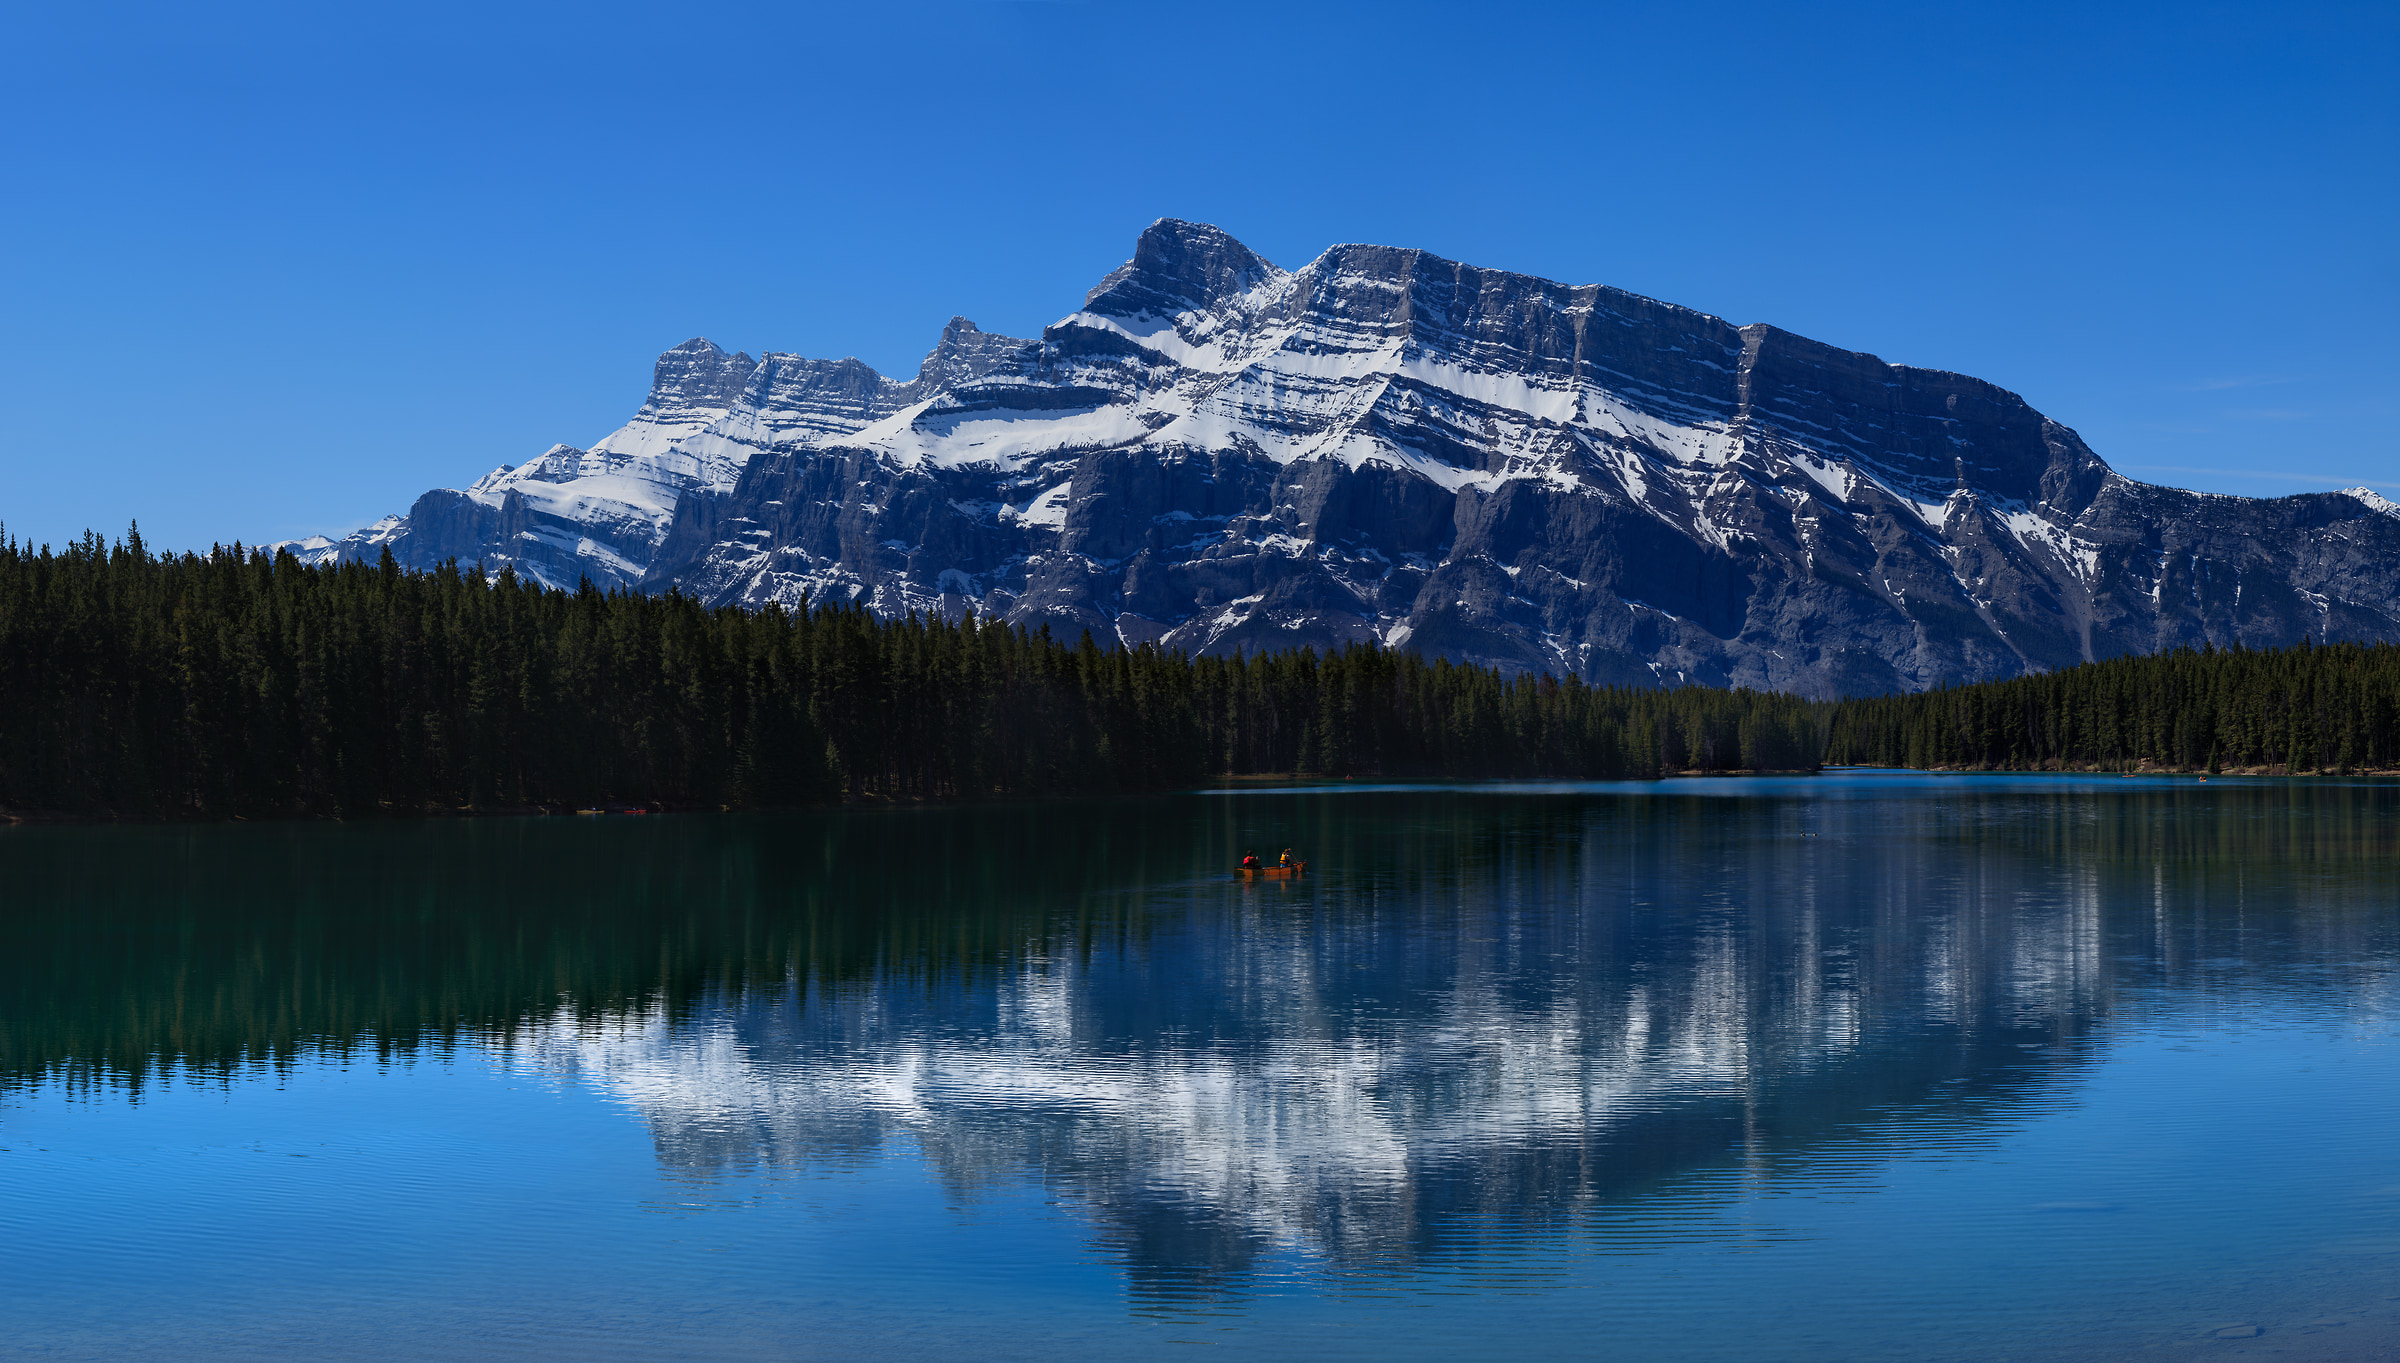 617 megapixels! A very high resolution, large-format VAST photo print of people kayaking on Two Jack Lake near Mount Rundle; fine art landscape photo created by Scott Dimond in Banff National Park, Alberta Canada.